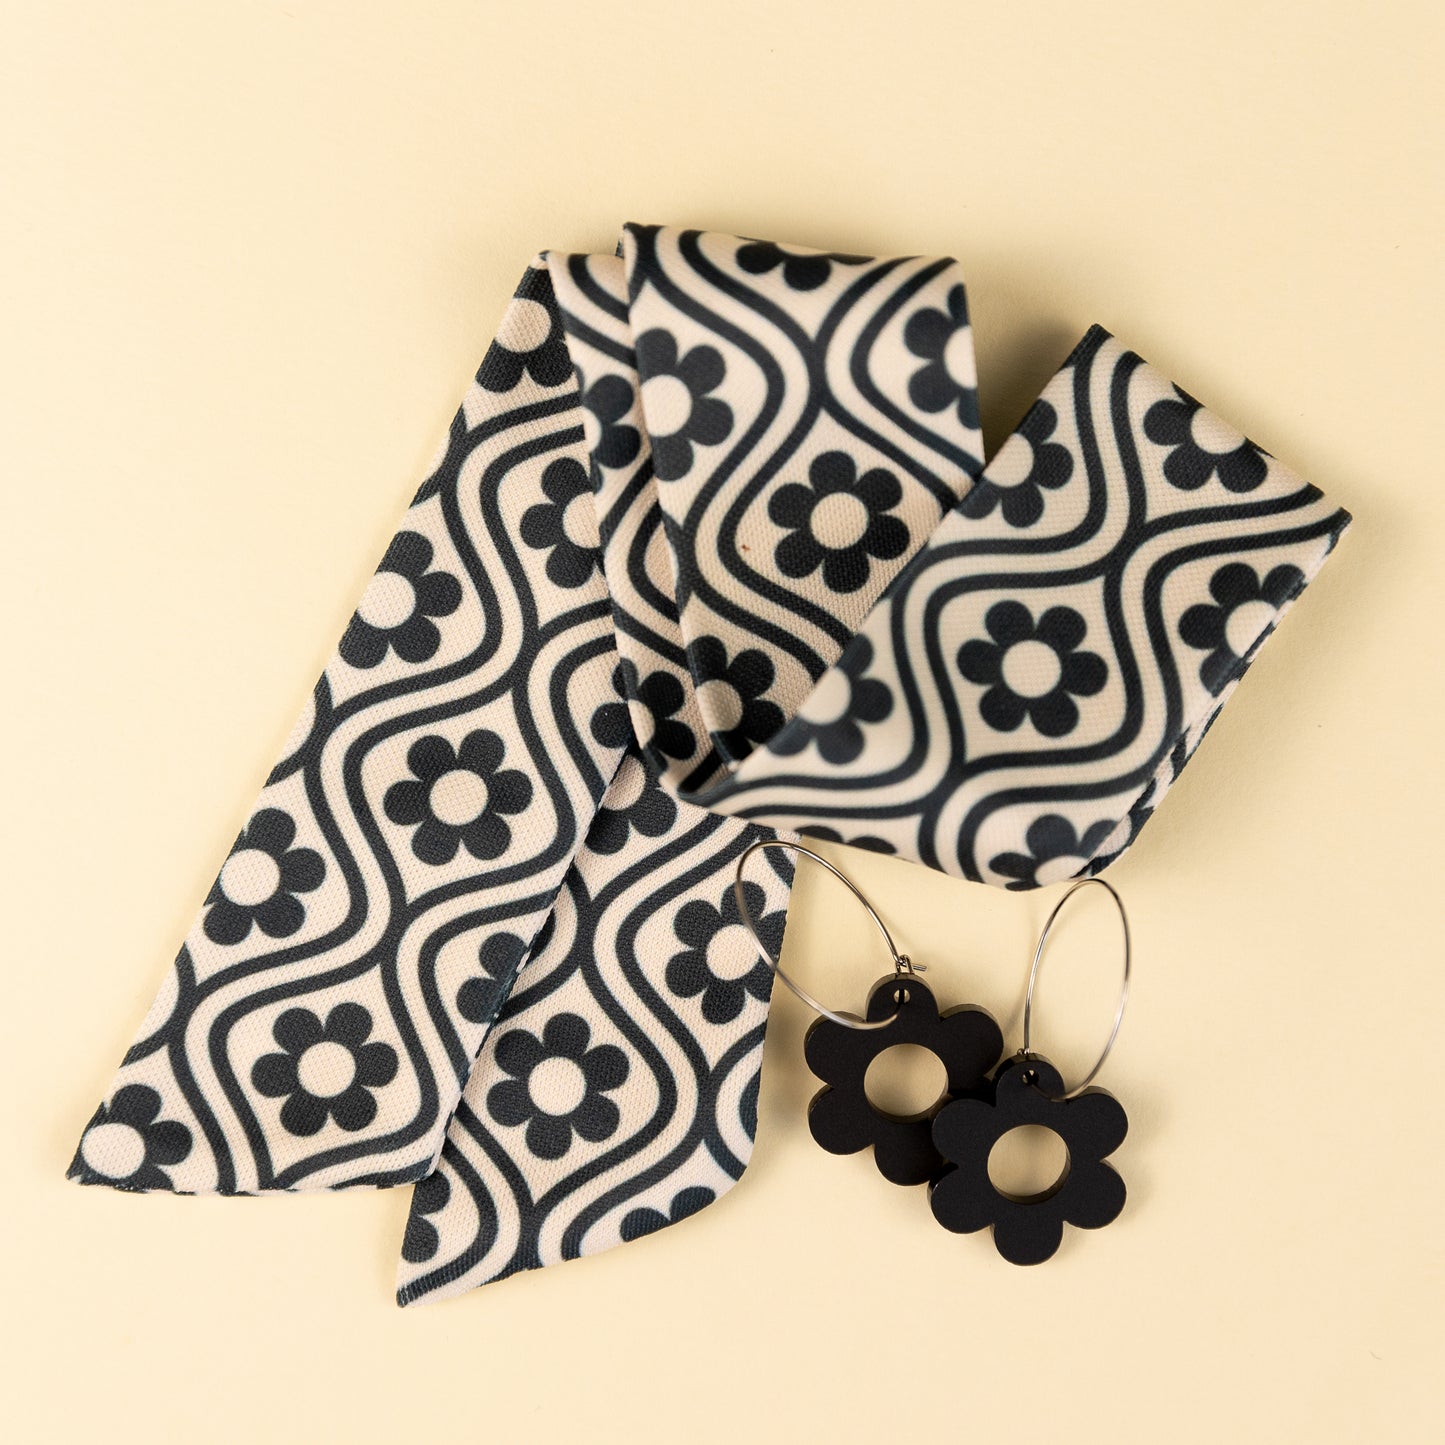 THE ULTIMATE HAIR SCARF SET in Black and White Retro Daisy/ Statement Hair Accessory + Earrings Gift Set